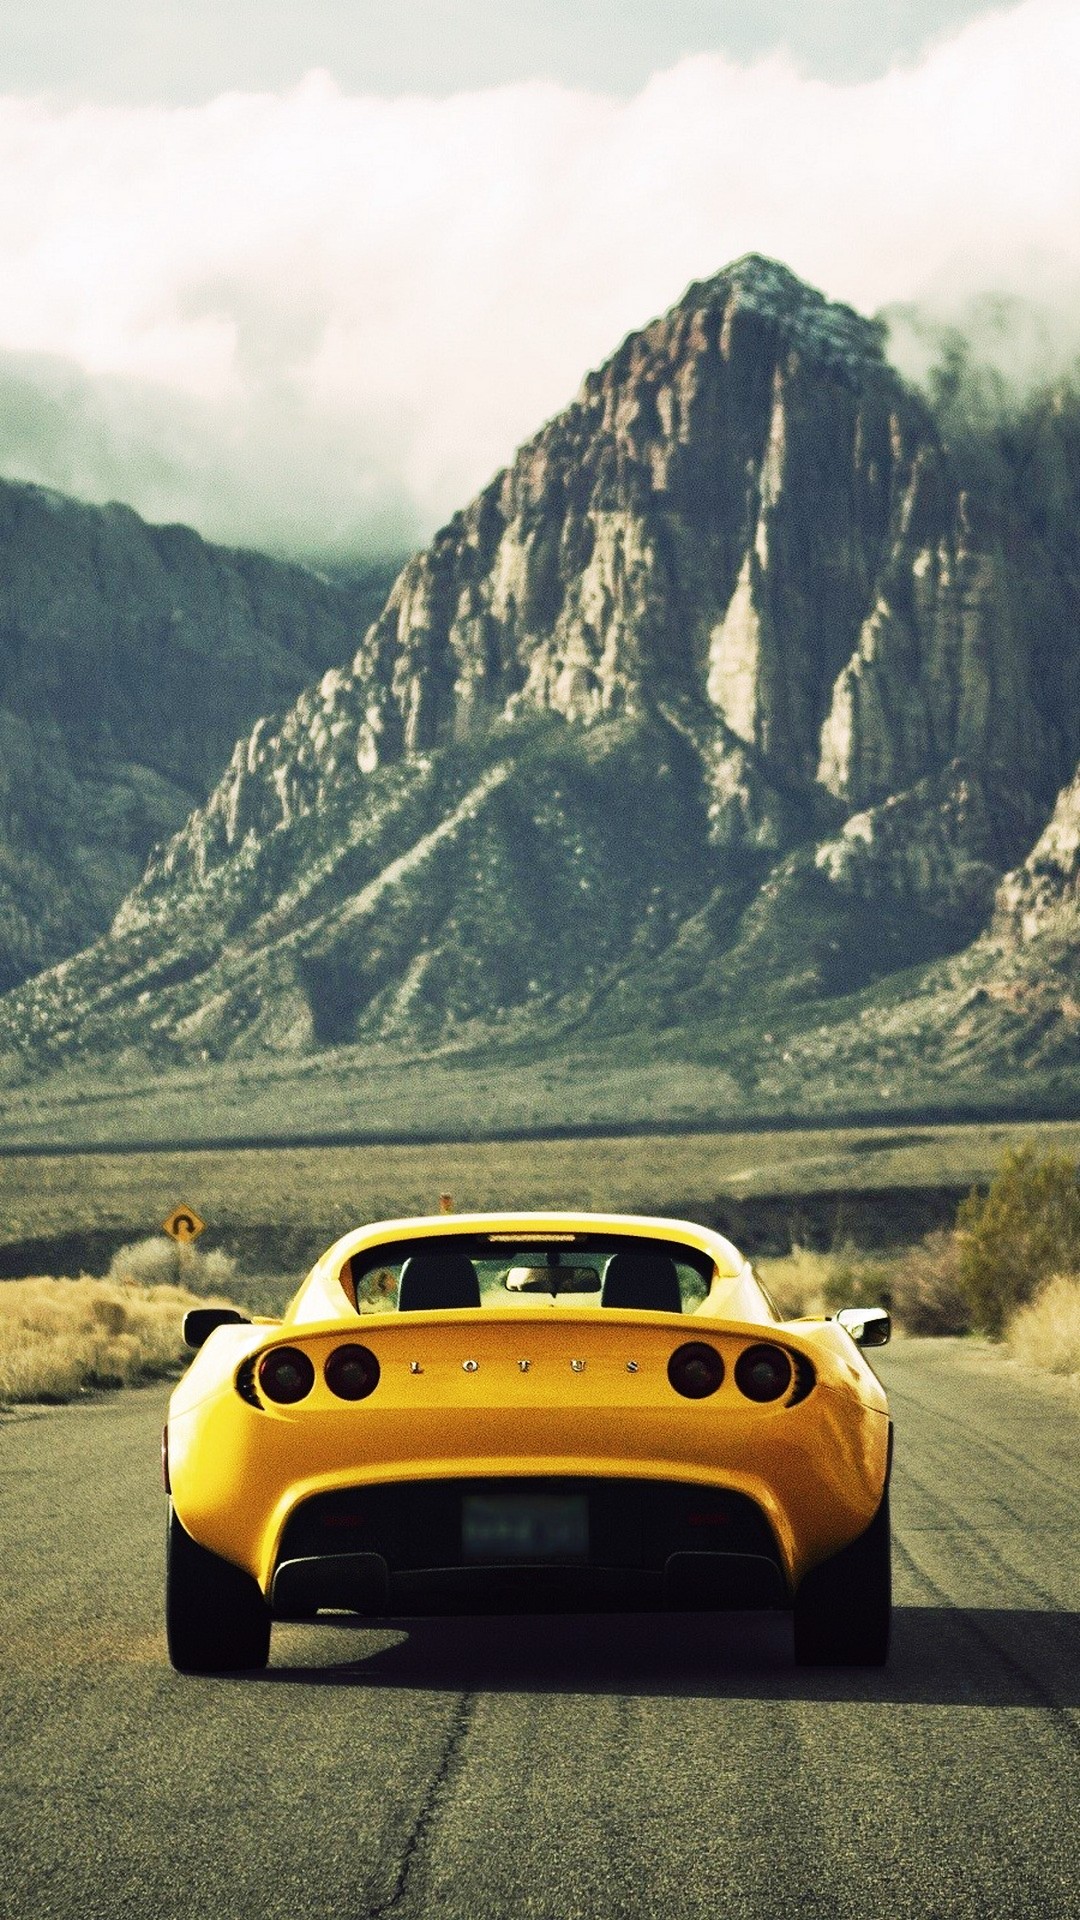 Car Wallpaper Android - 2020 Android Wallpapers